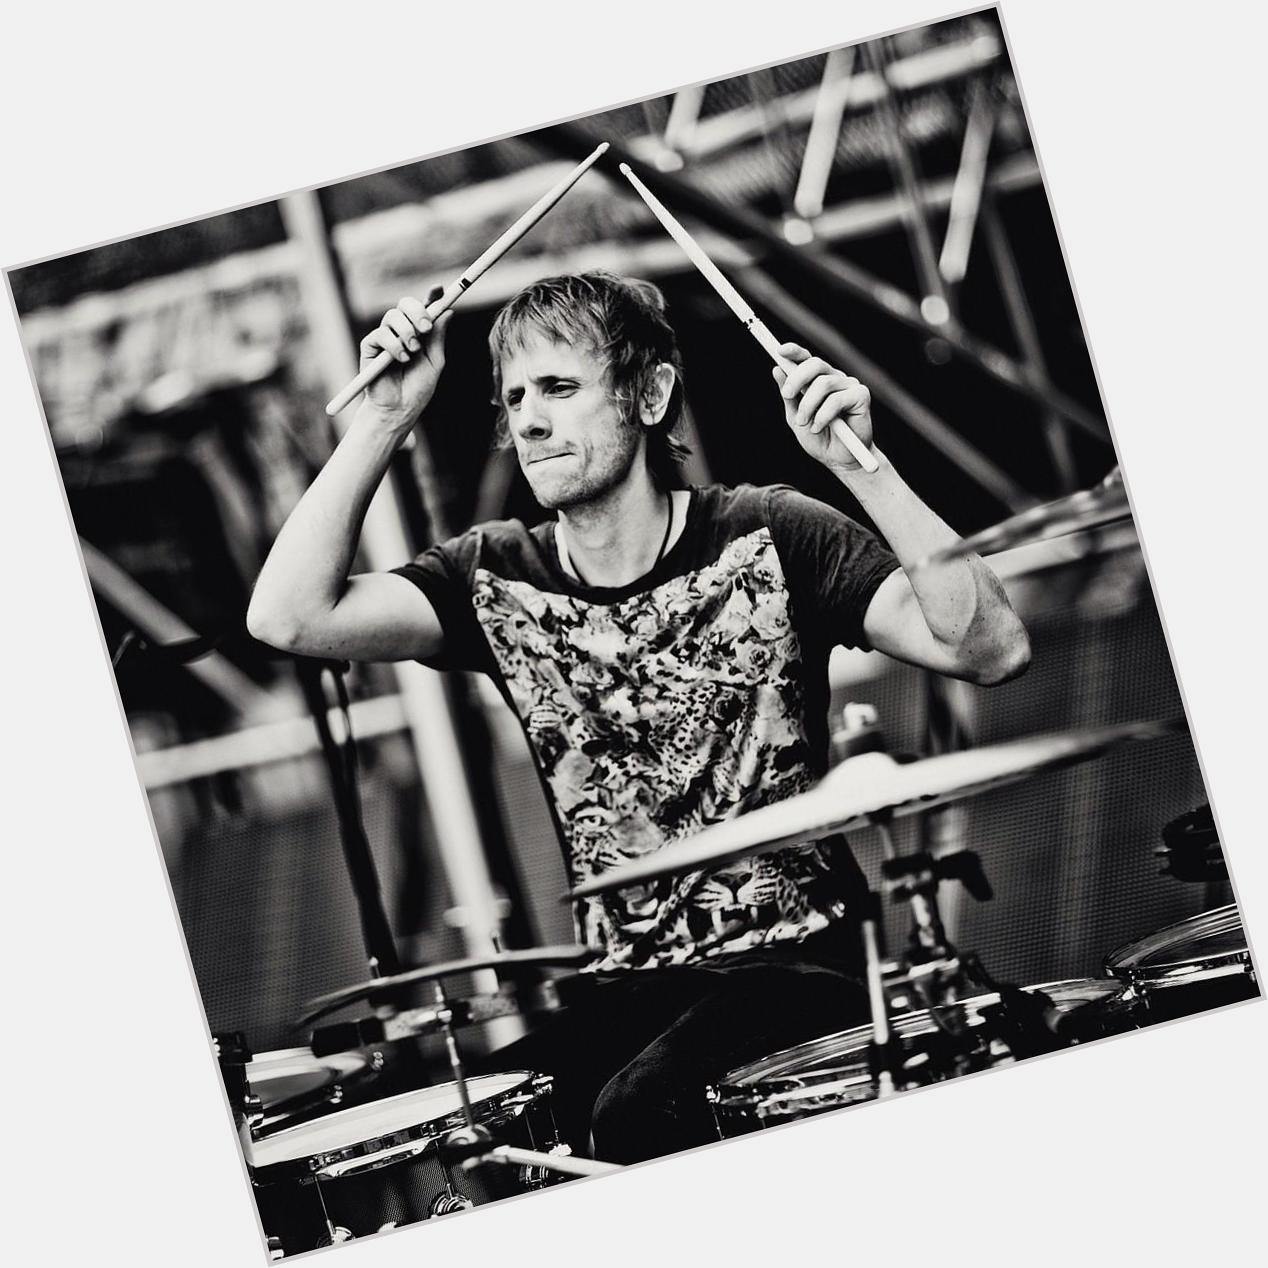 Happy bday Dominic Howard, 37 years today!! One of the best drummers there is!  